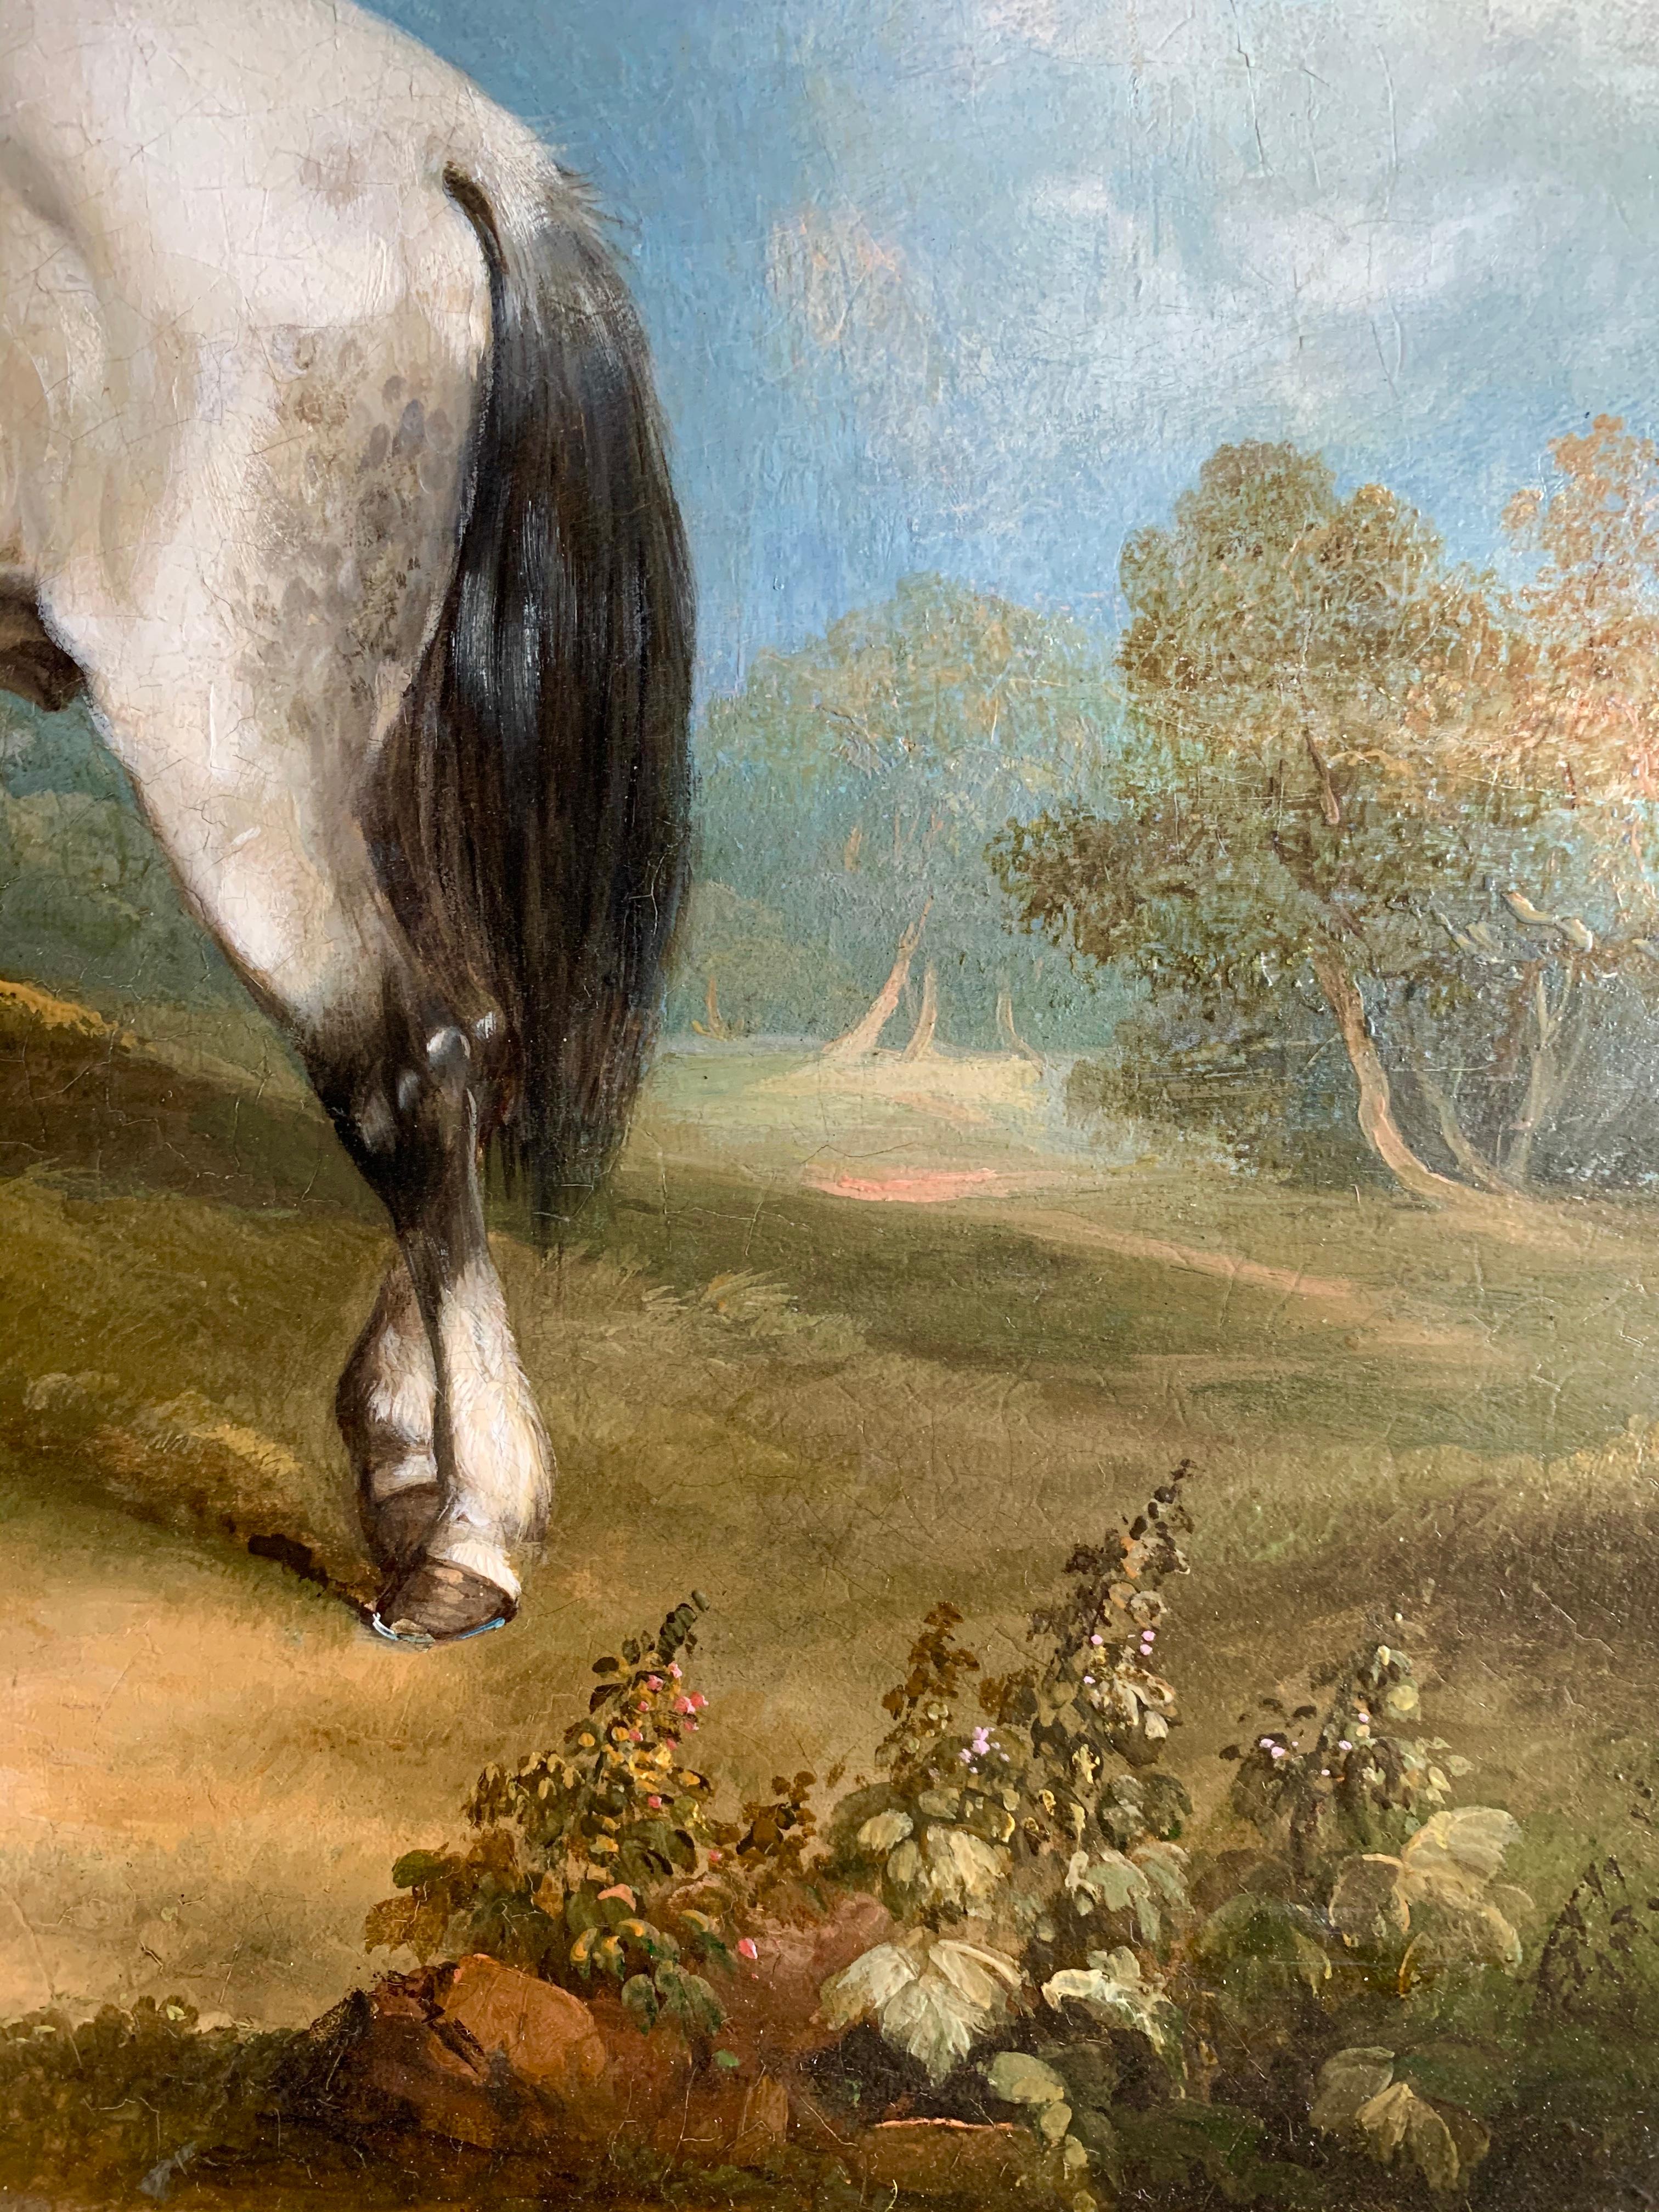 THE FERN GATHERER  - BY WILLIAM SHAYER SENIOR (1787-1879)
 
Period Portraits are proud to offer this fine and highly decorative equestrian oil.  It is full to the brim with charming details, like the horses hooves casually at rest, the loosely